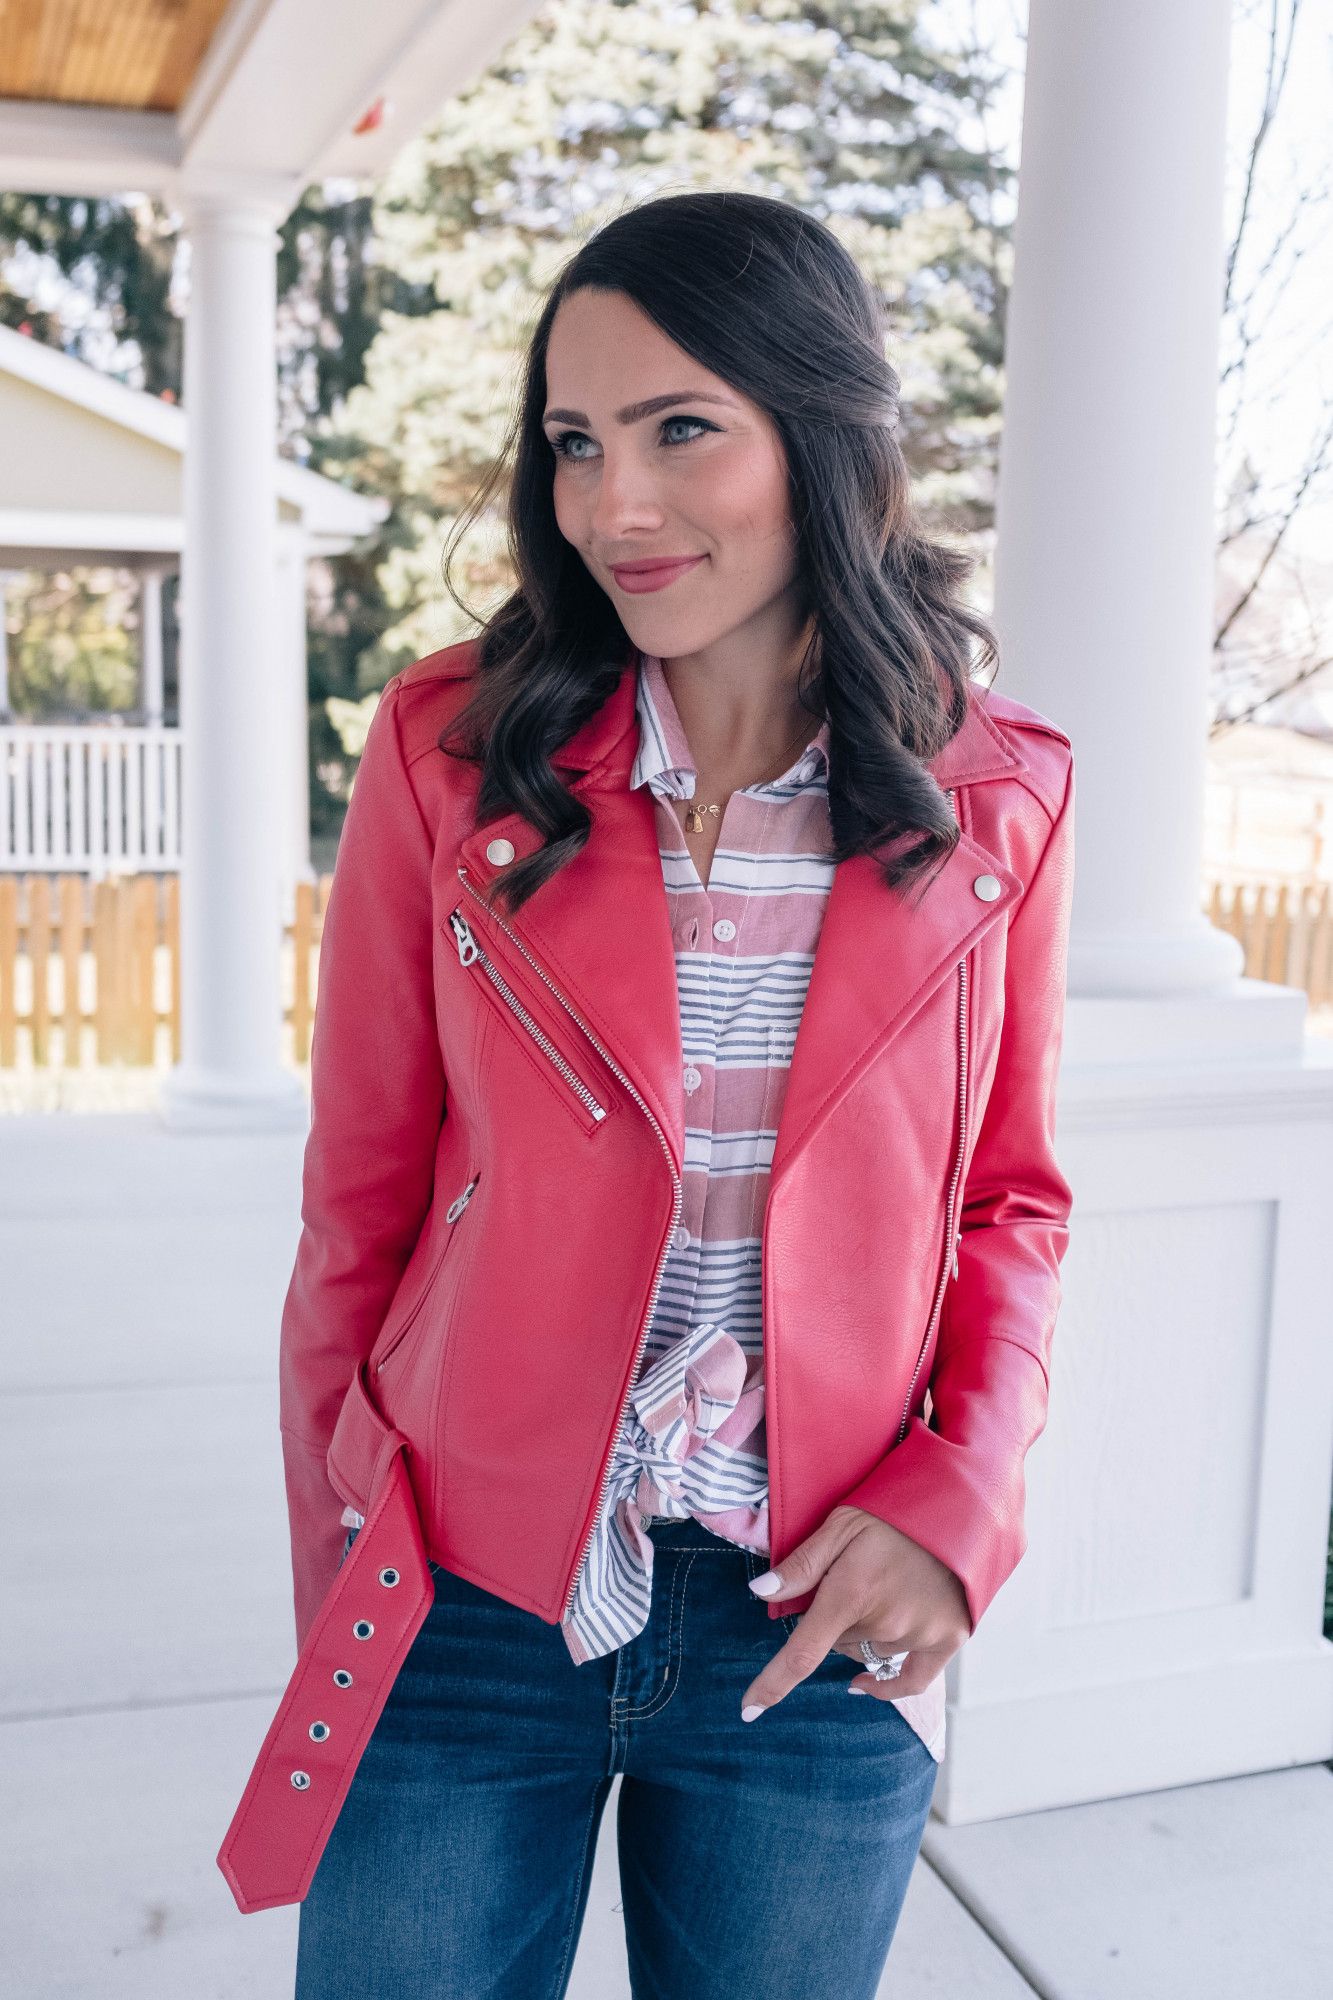 The Moto Jacket: Reflect Your True Style & Find Your Petite Fit